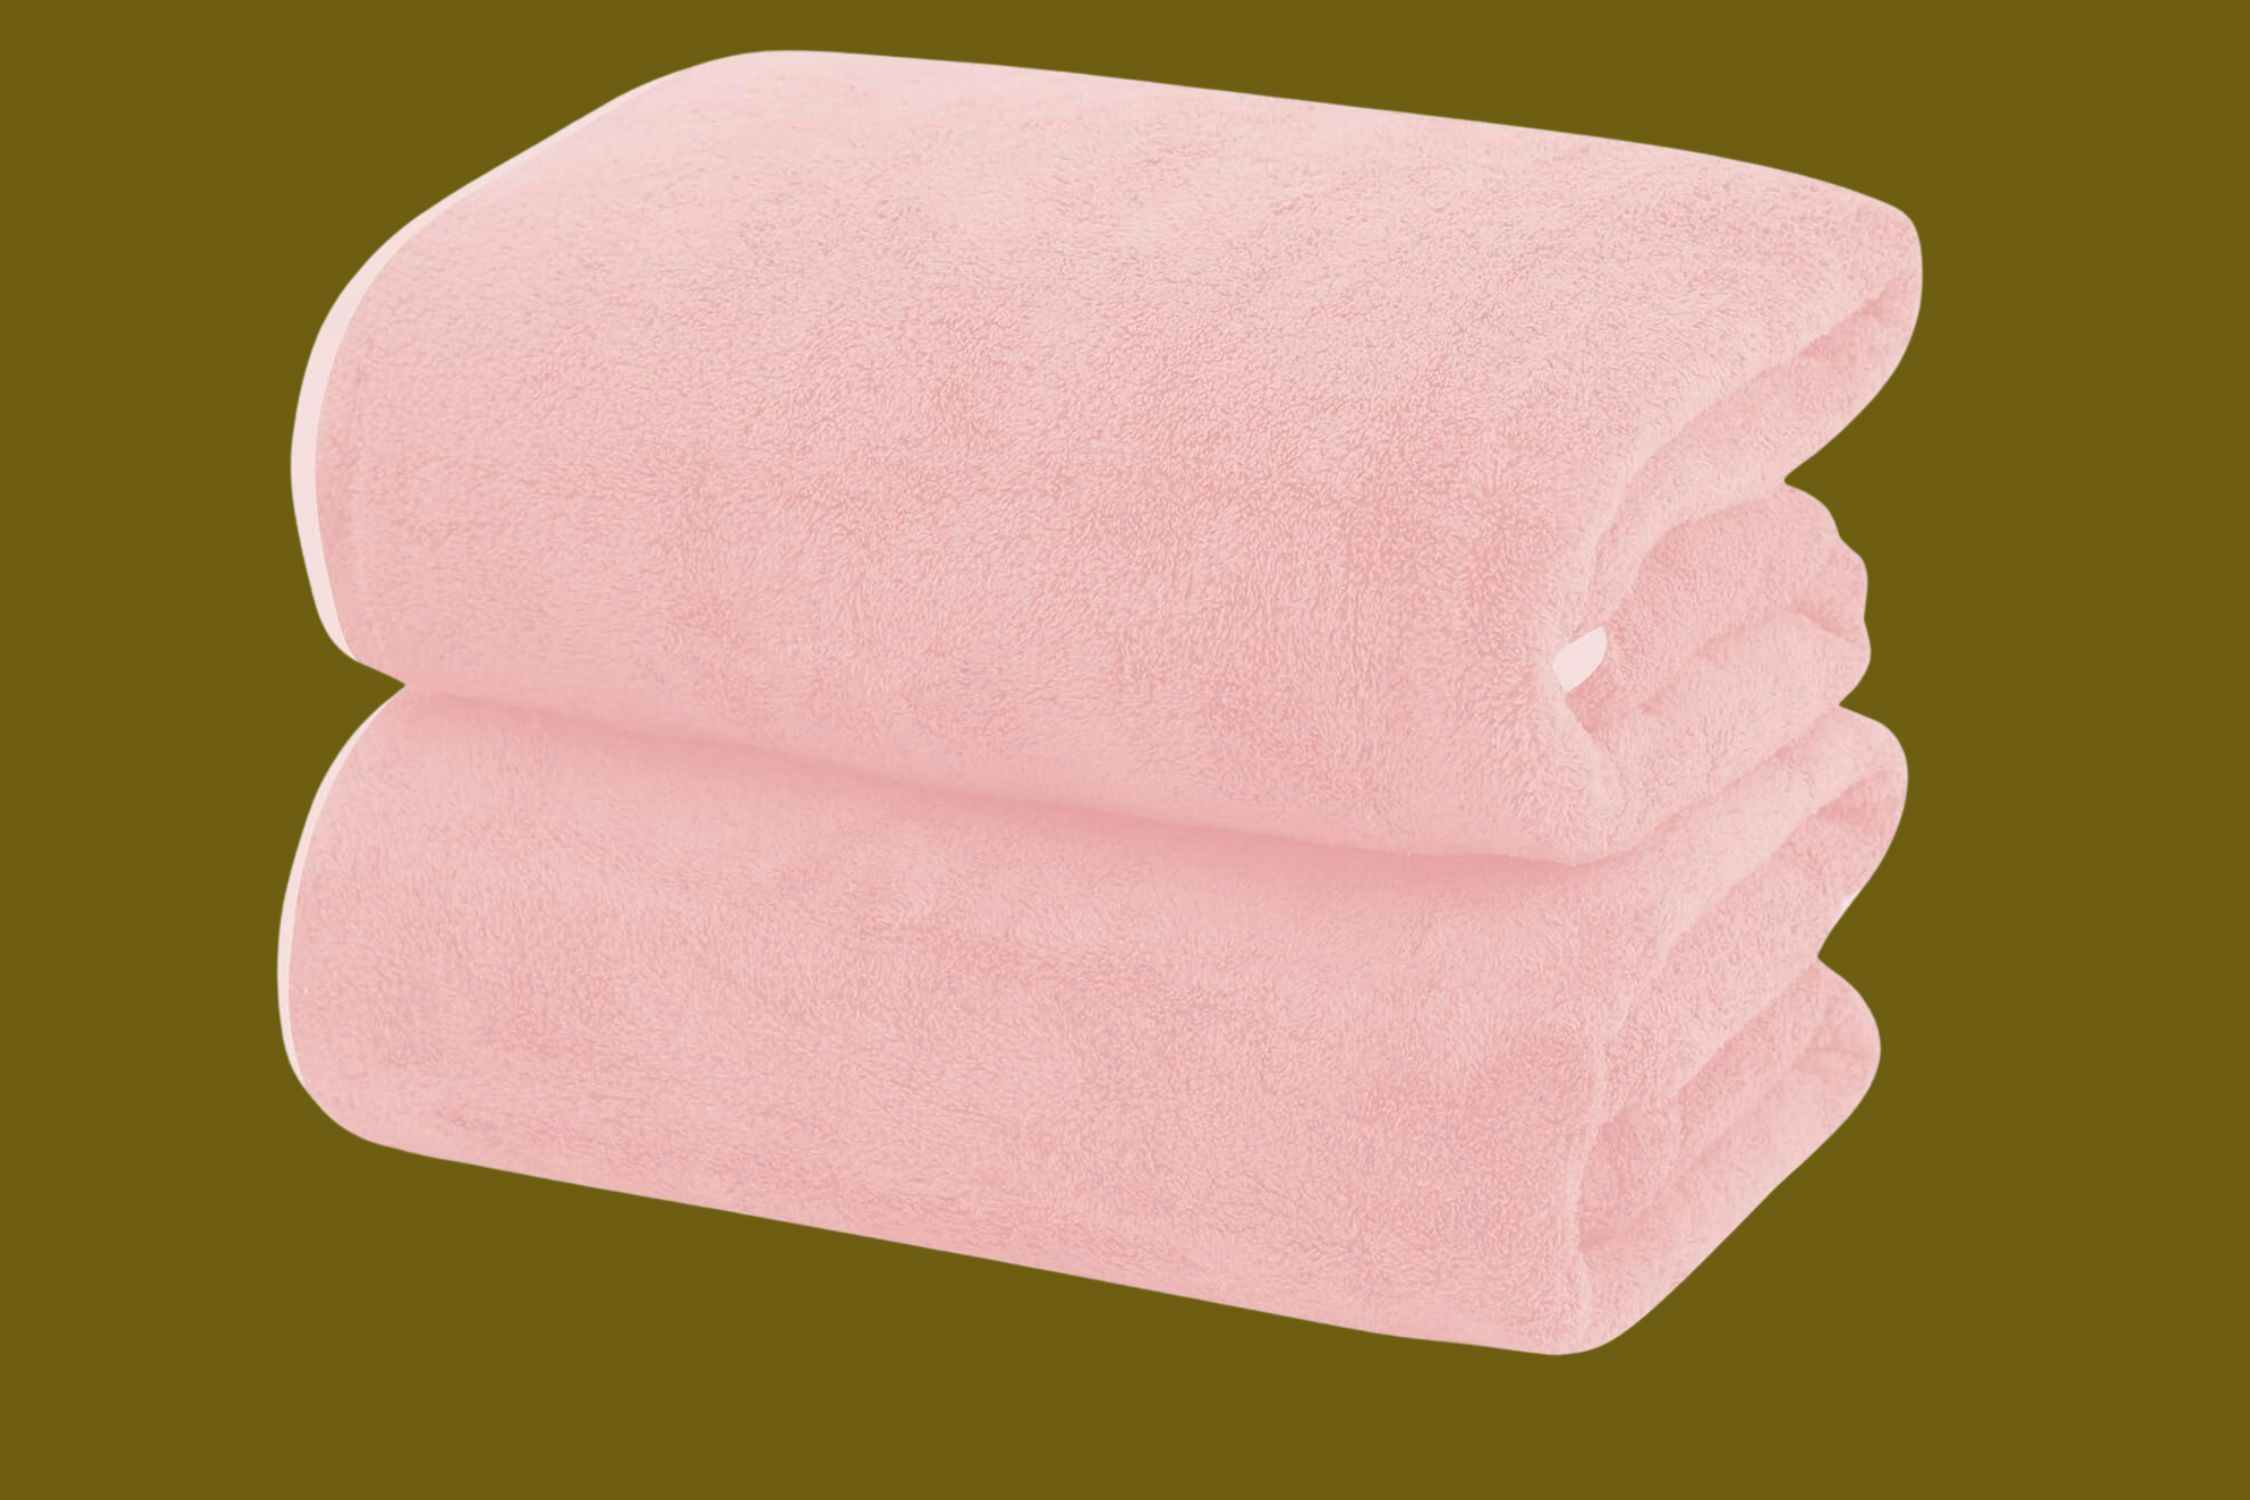 Get 2 Quick-Drying Towels for Just $9 on Amazon (Reg. $30)